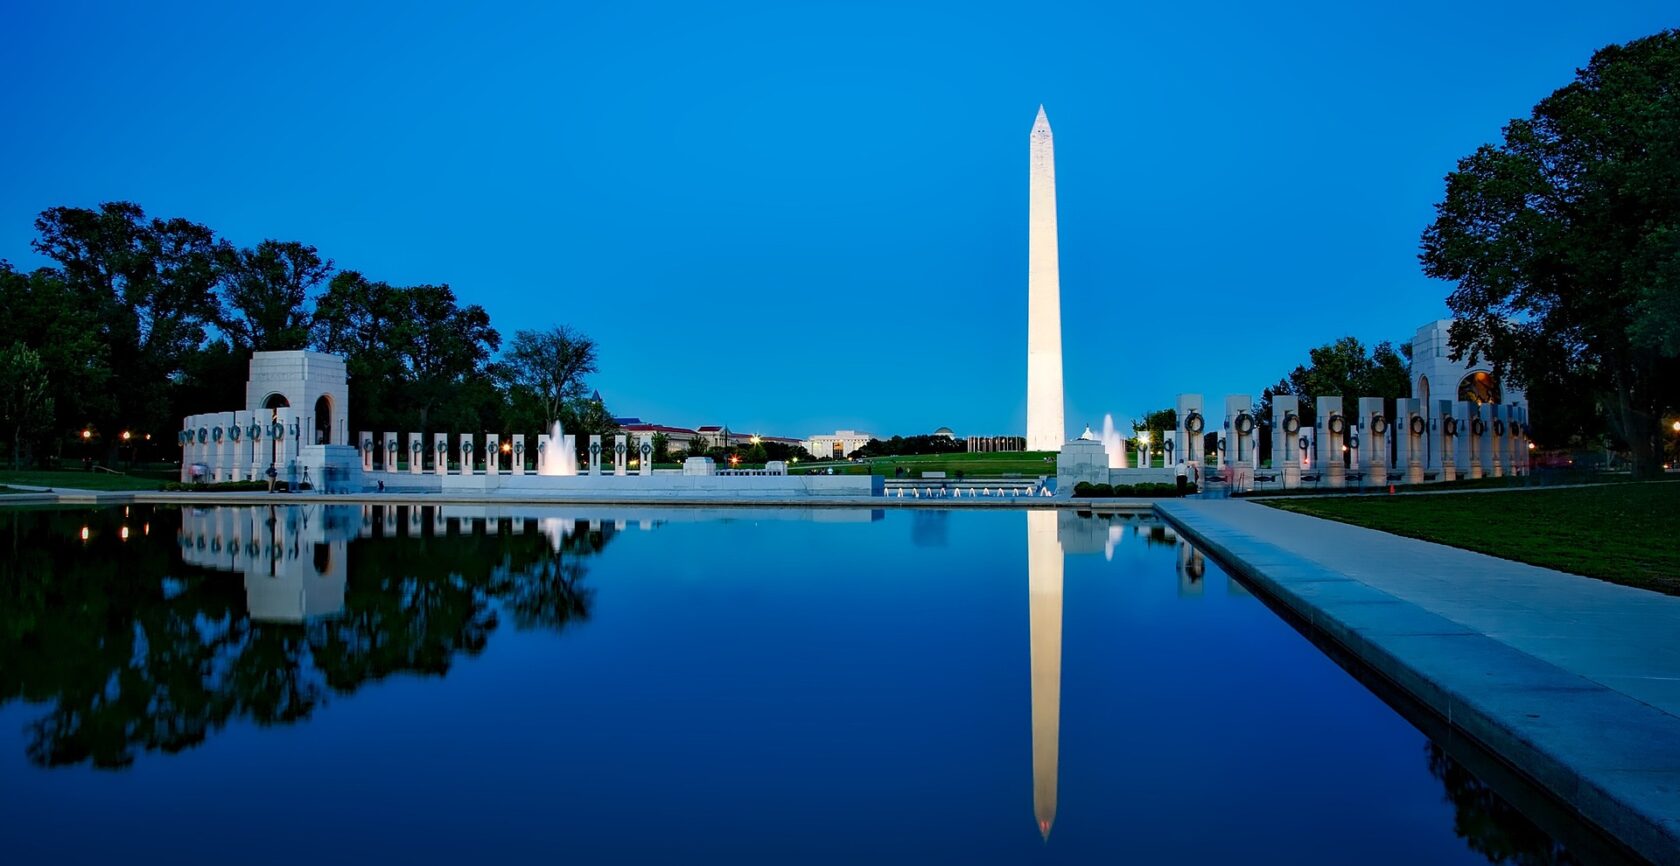 The National Monument reflecting in the Lincoln Memorial Reflecting Pool in Washington, D.C. (an Atlantis site).